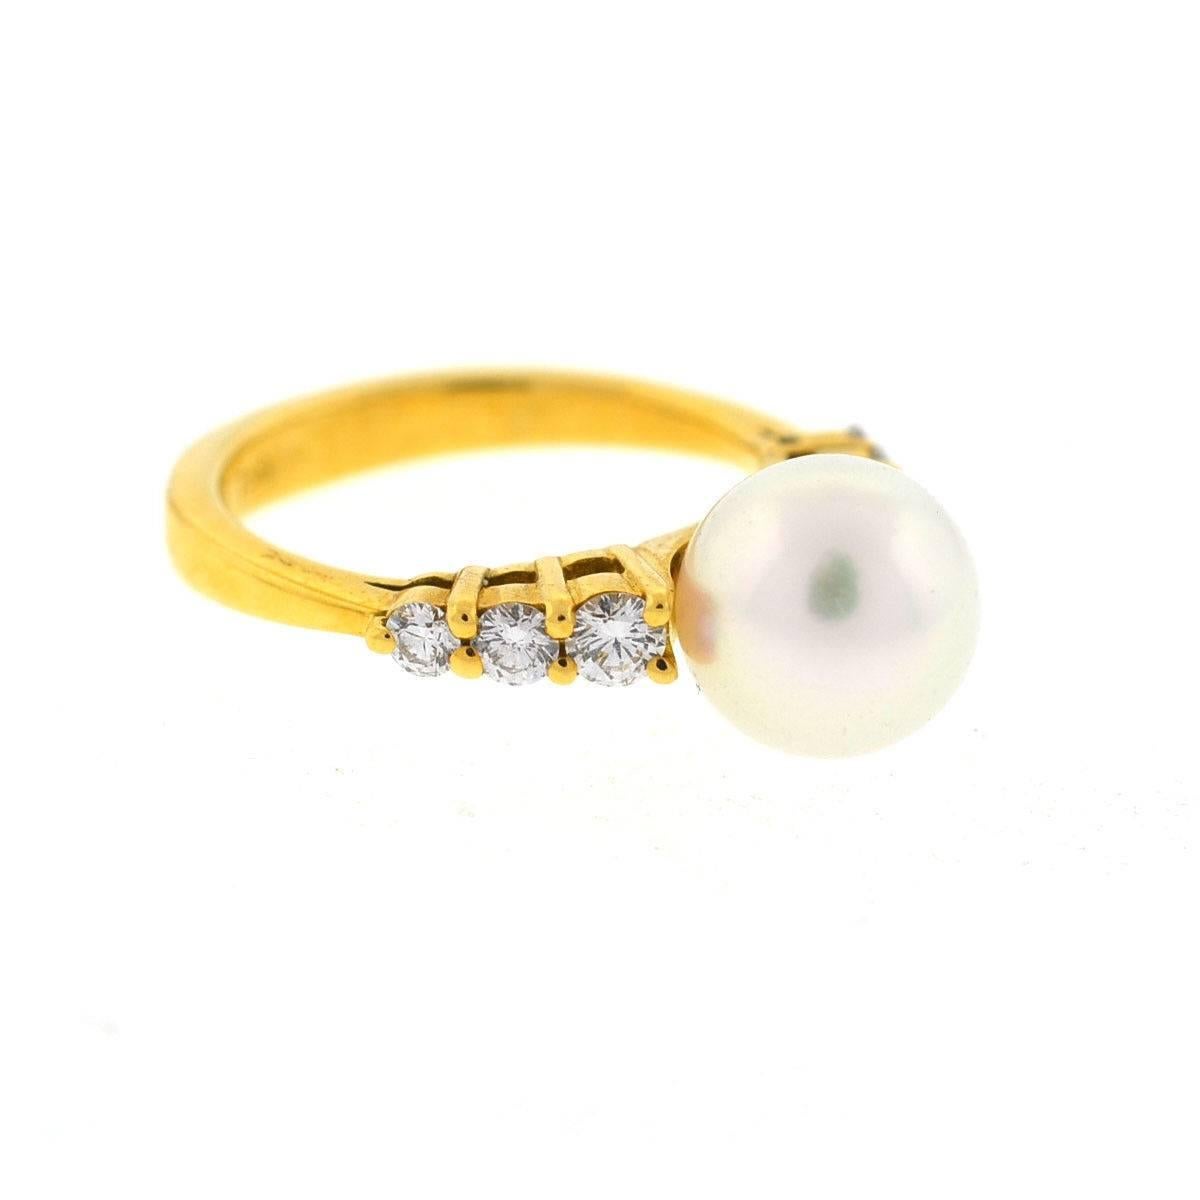 Company - Mikimoto
Style - Ladies
Metal - 18k Yellow Gold
Size - 4.25
Weight - 4.3 grams
Stones - Diamonds - Approx. .35cts tw 
Pearl - 8.25 mm